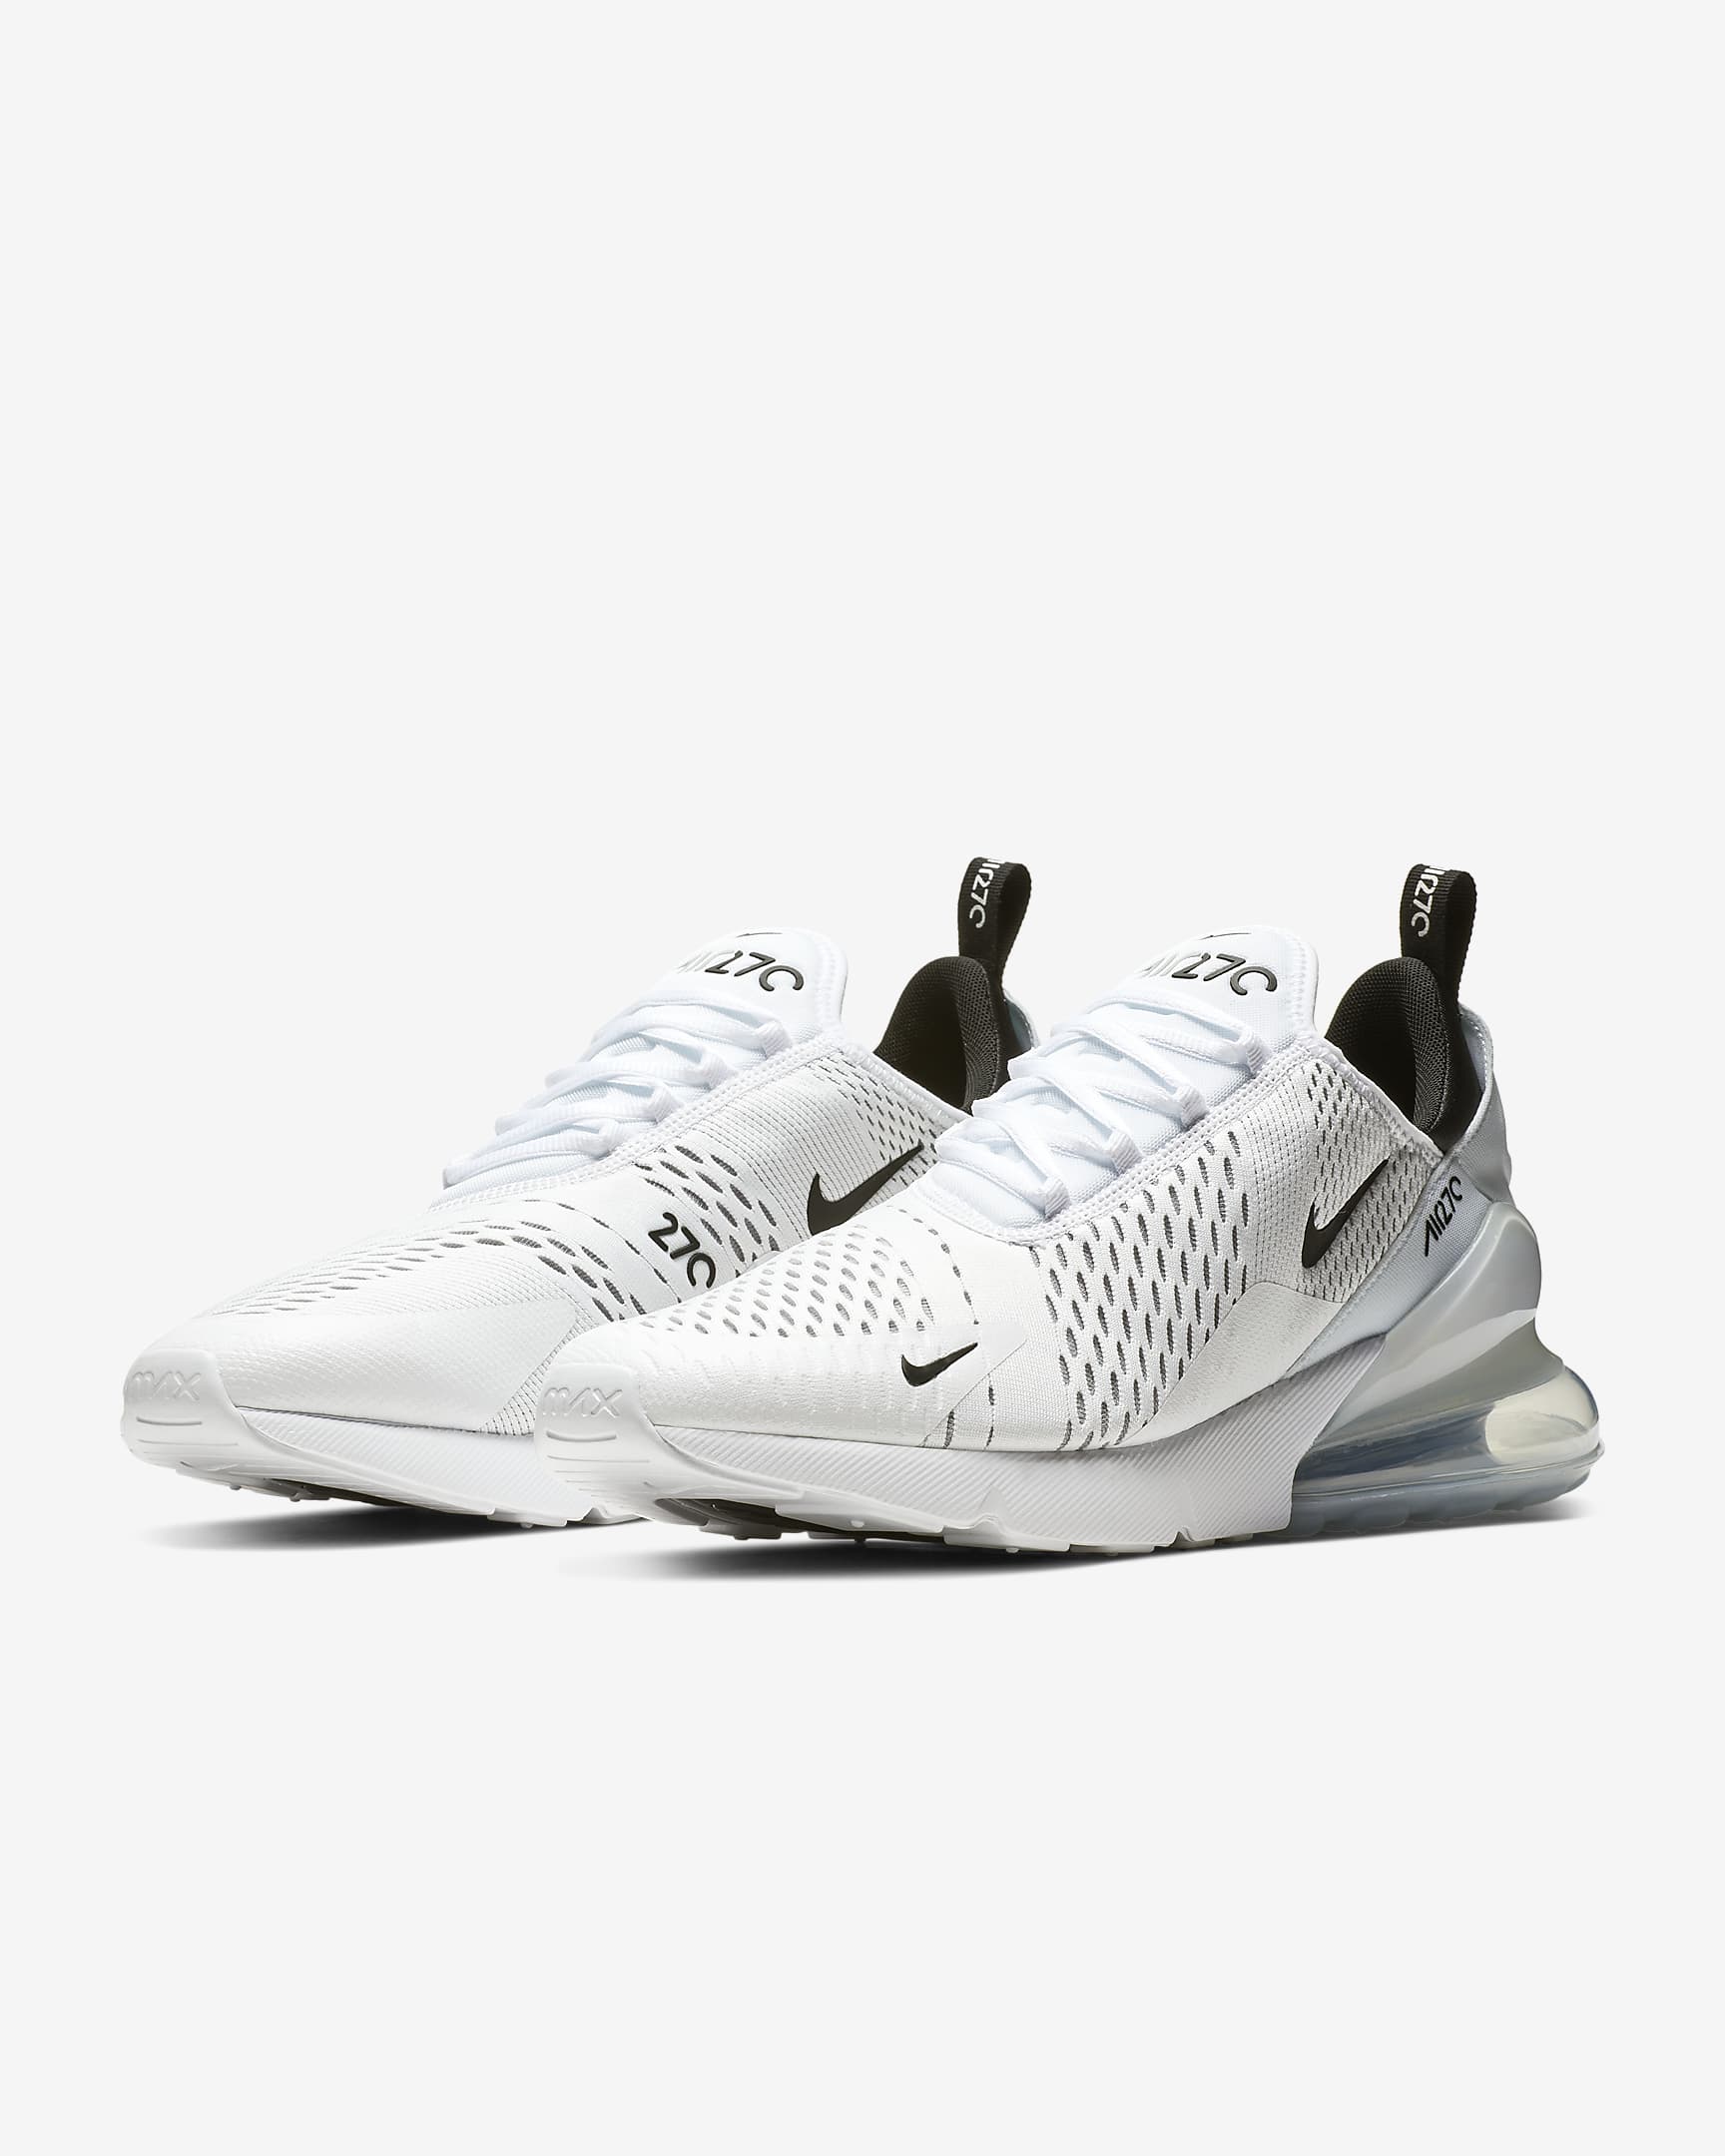 Limited Edition Madness: Snag Your Pair of Nike Air Max 270 Men’s Shoes Before They Sell Out!